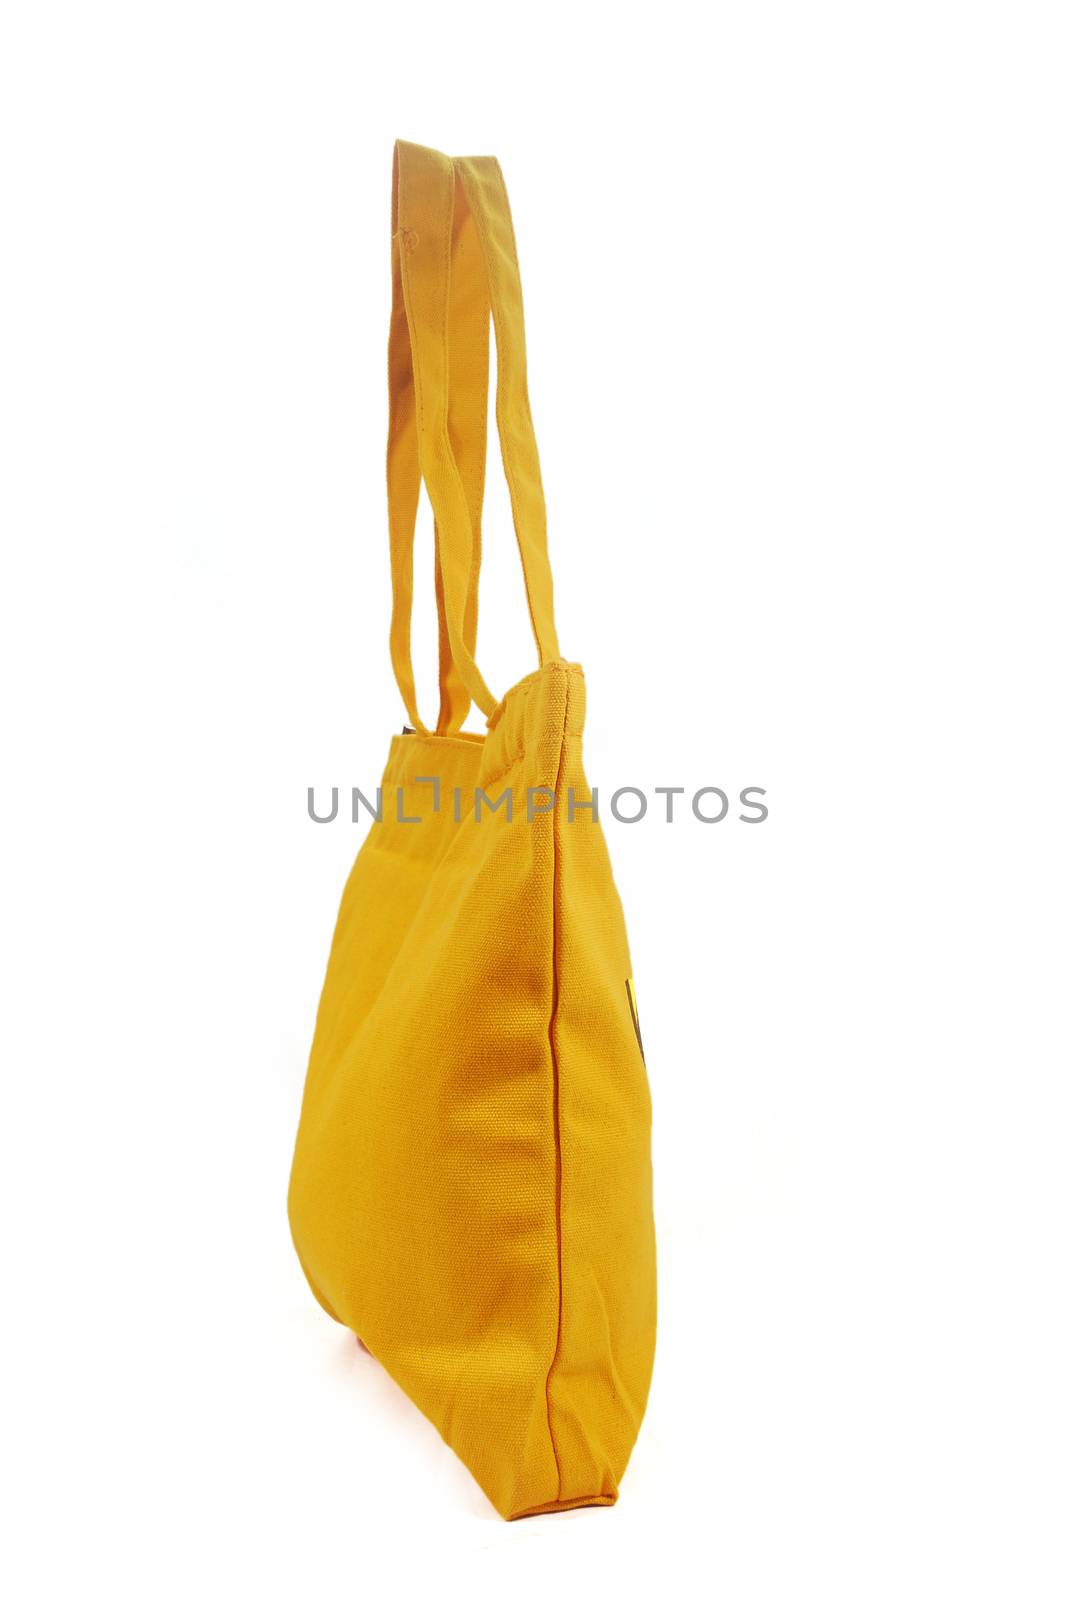 The yellow cloth bag is used for recycling.